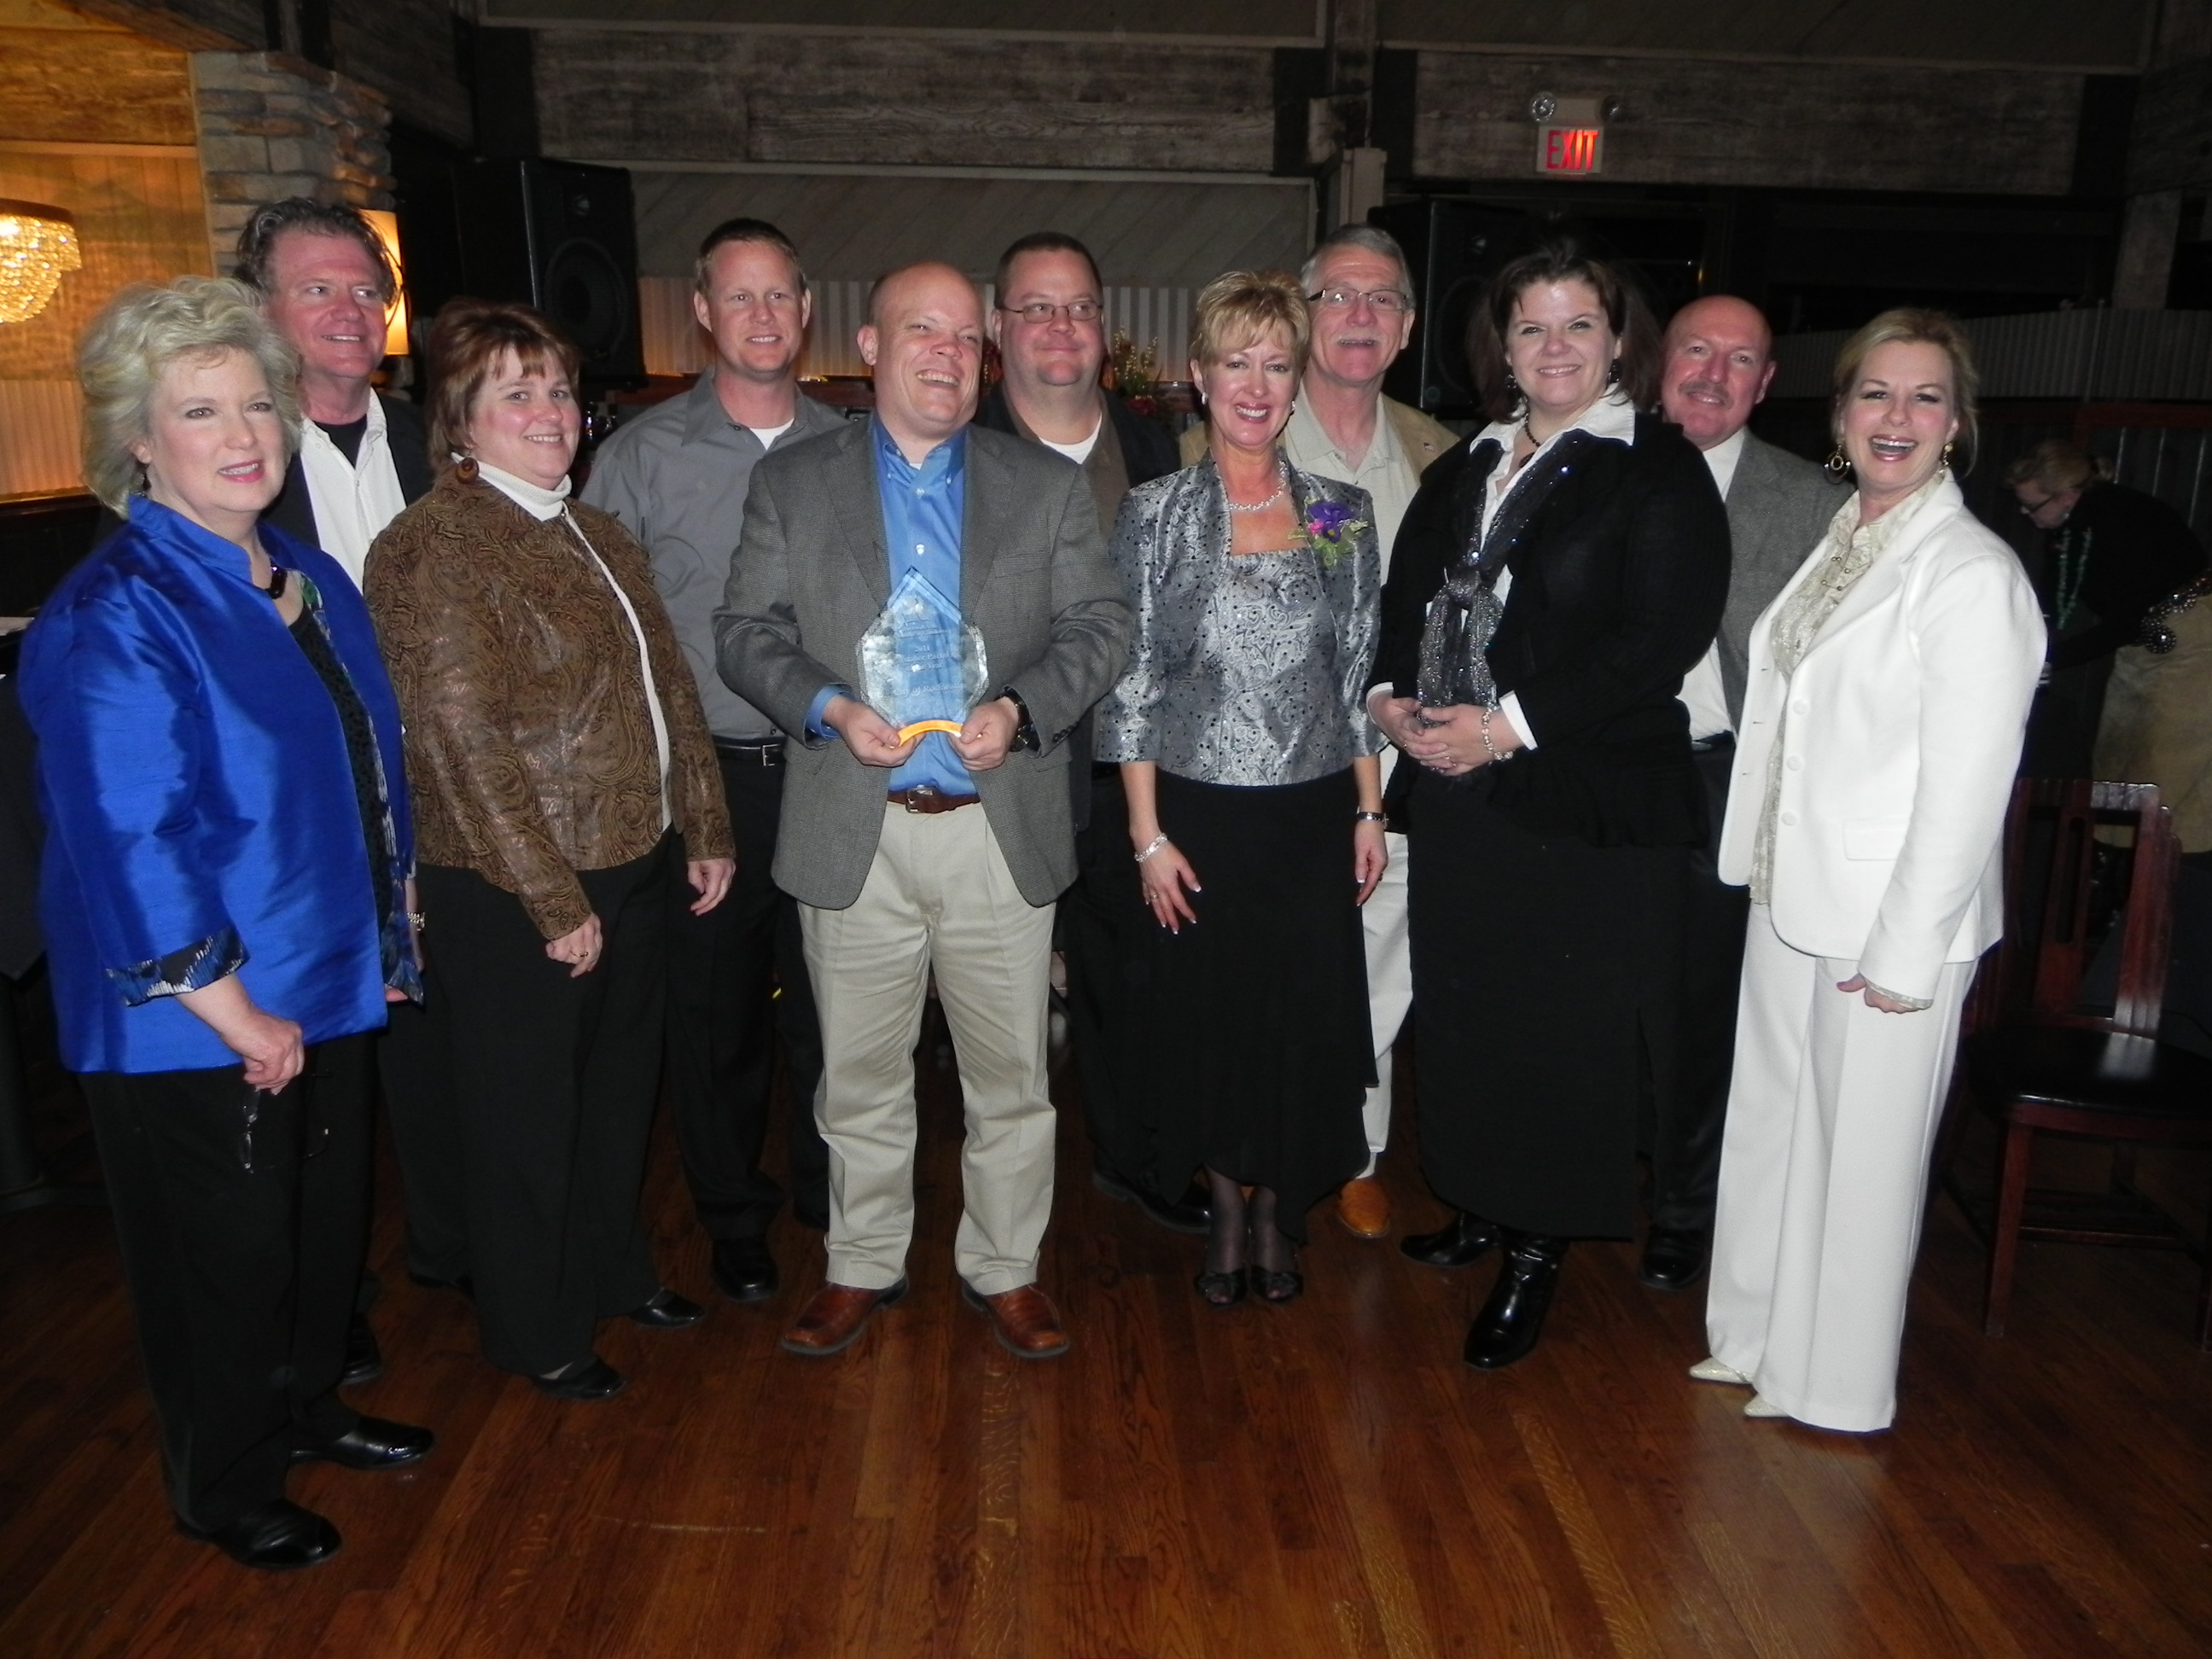 Award winners honored, members recognized at Chamber banquet